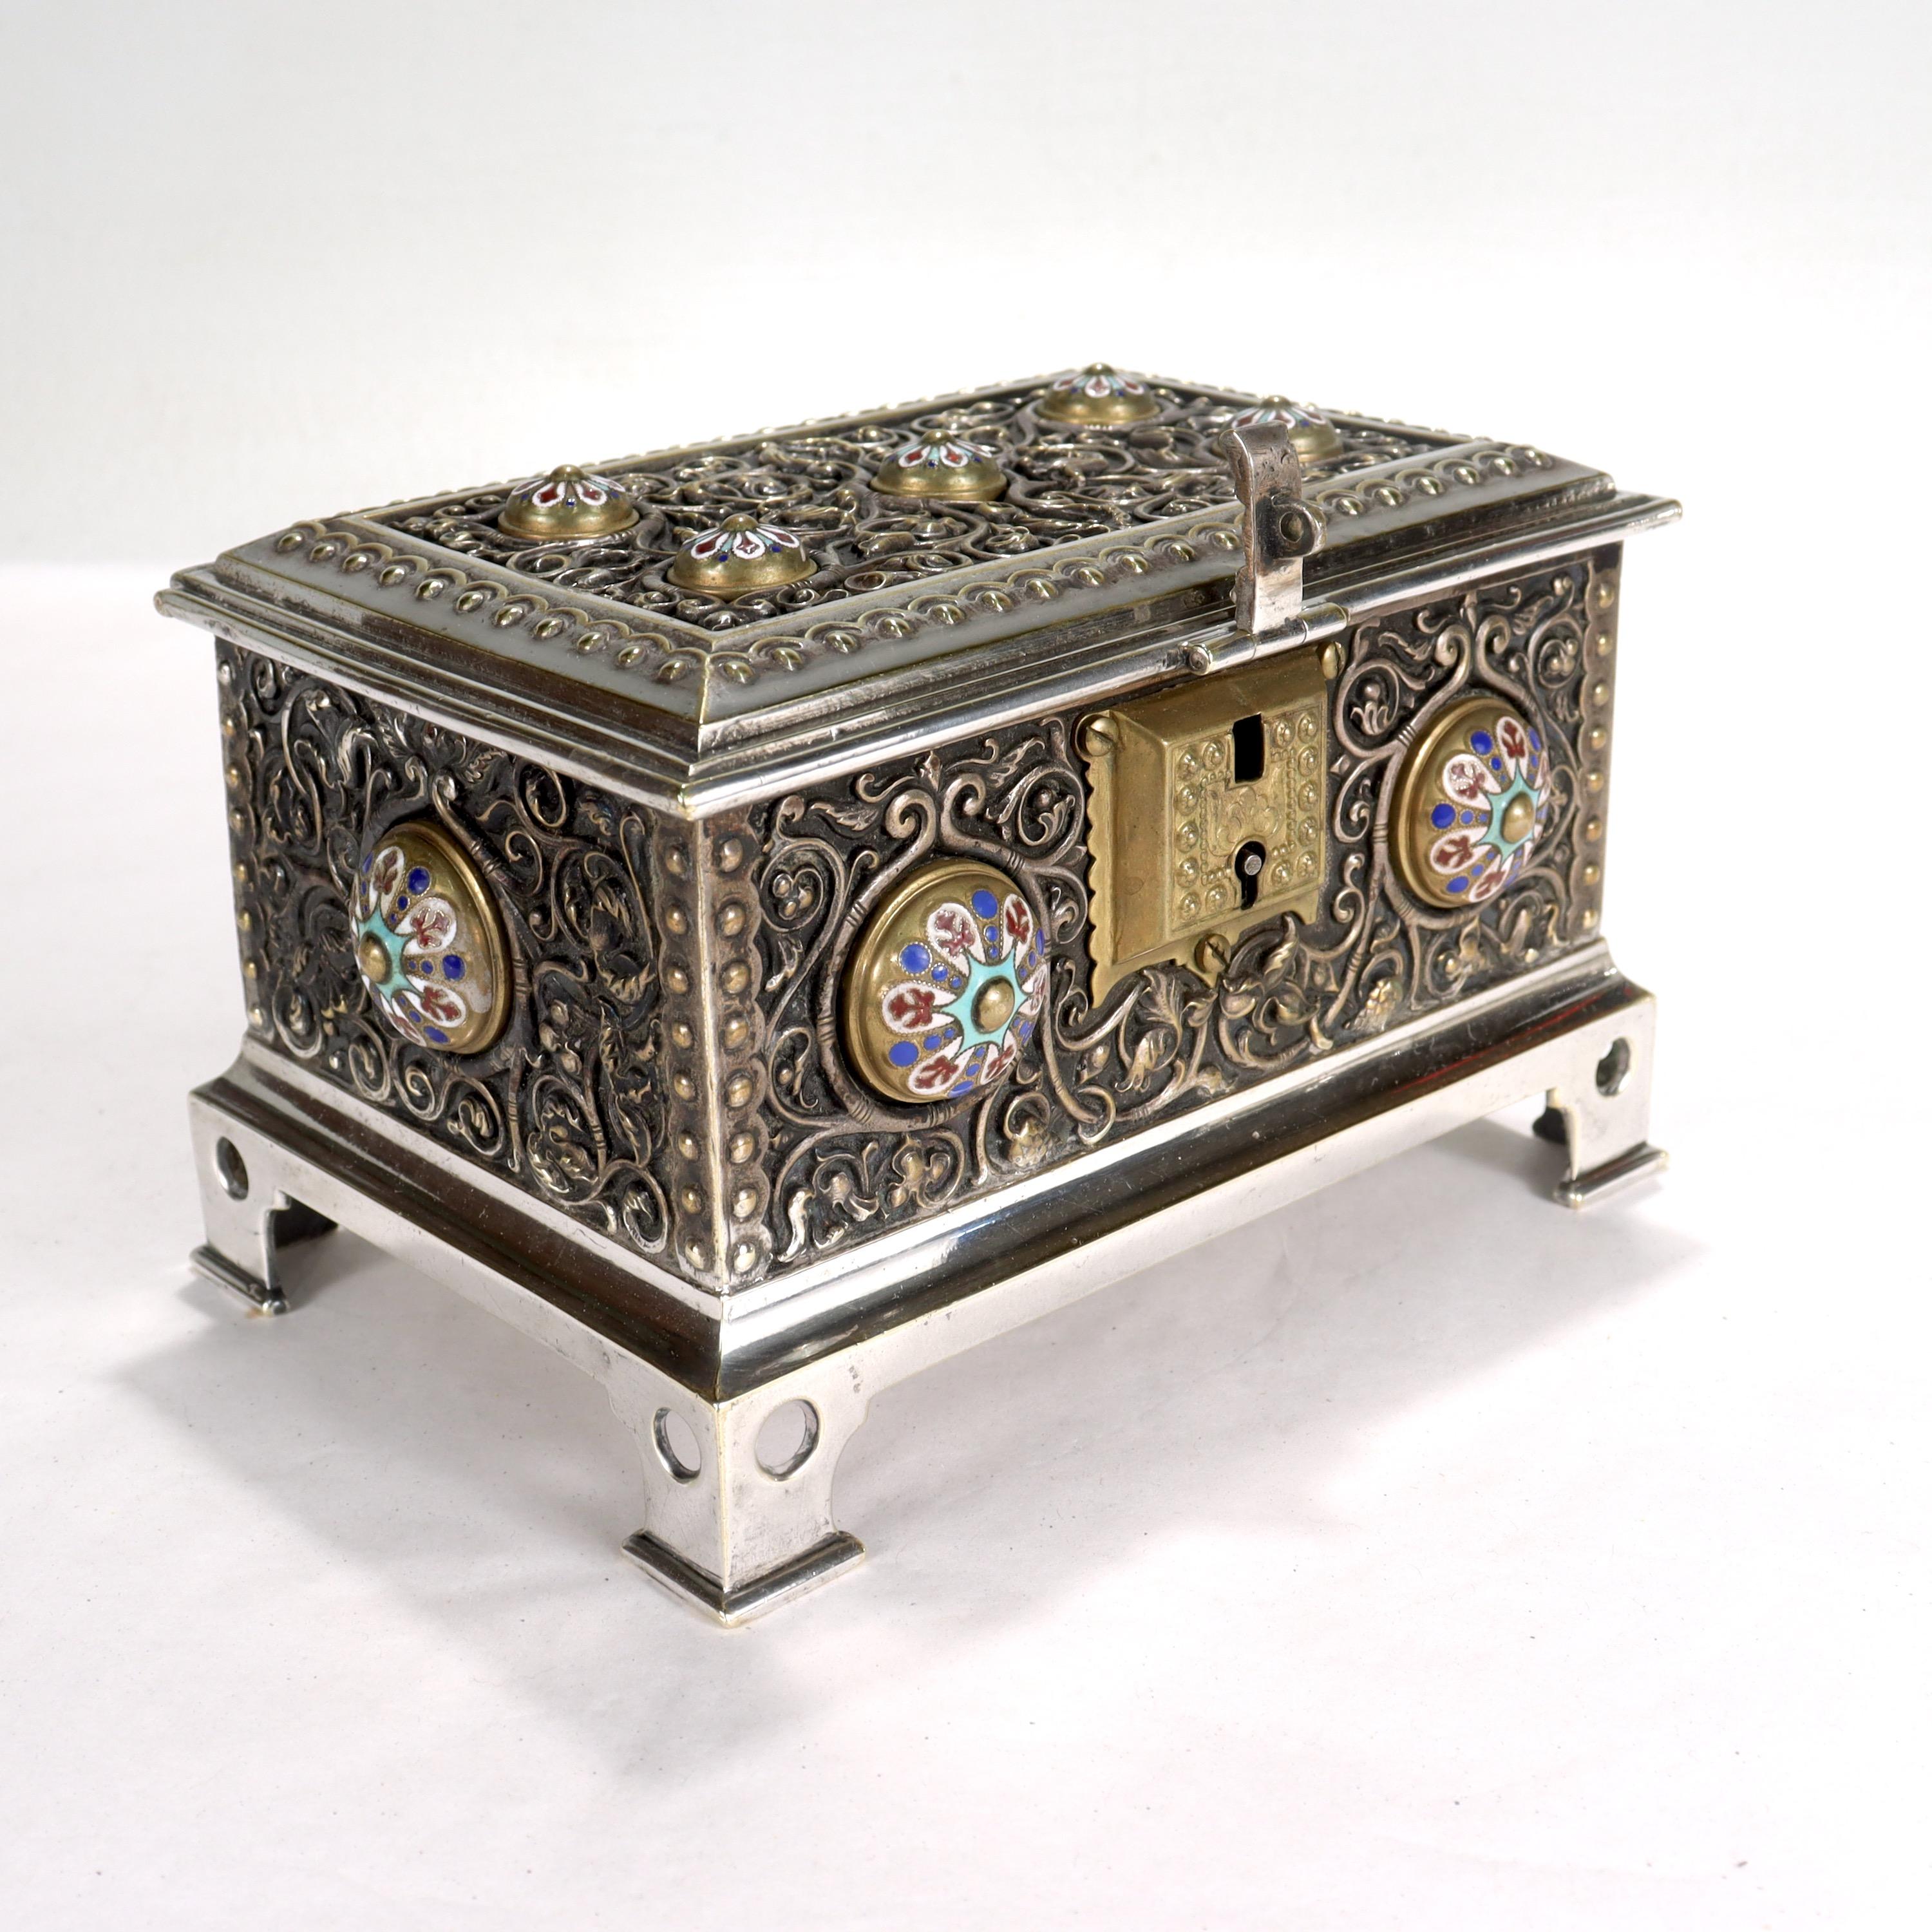 Russian Revival Antique Silver Plated & Enameled Table Box or Casket in the Russian Taste For Sale